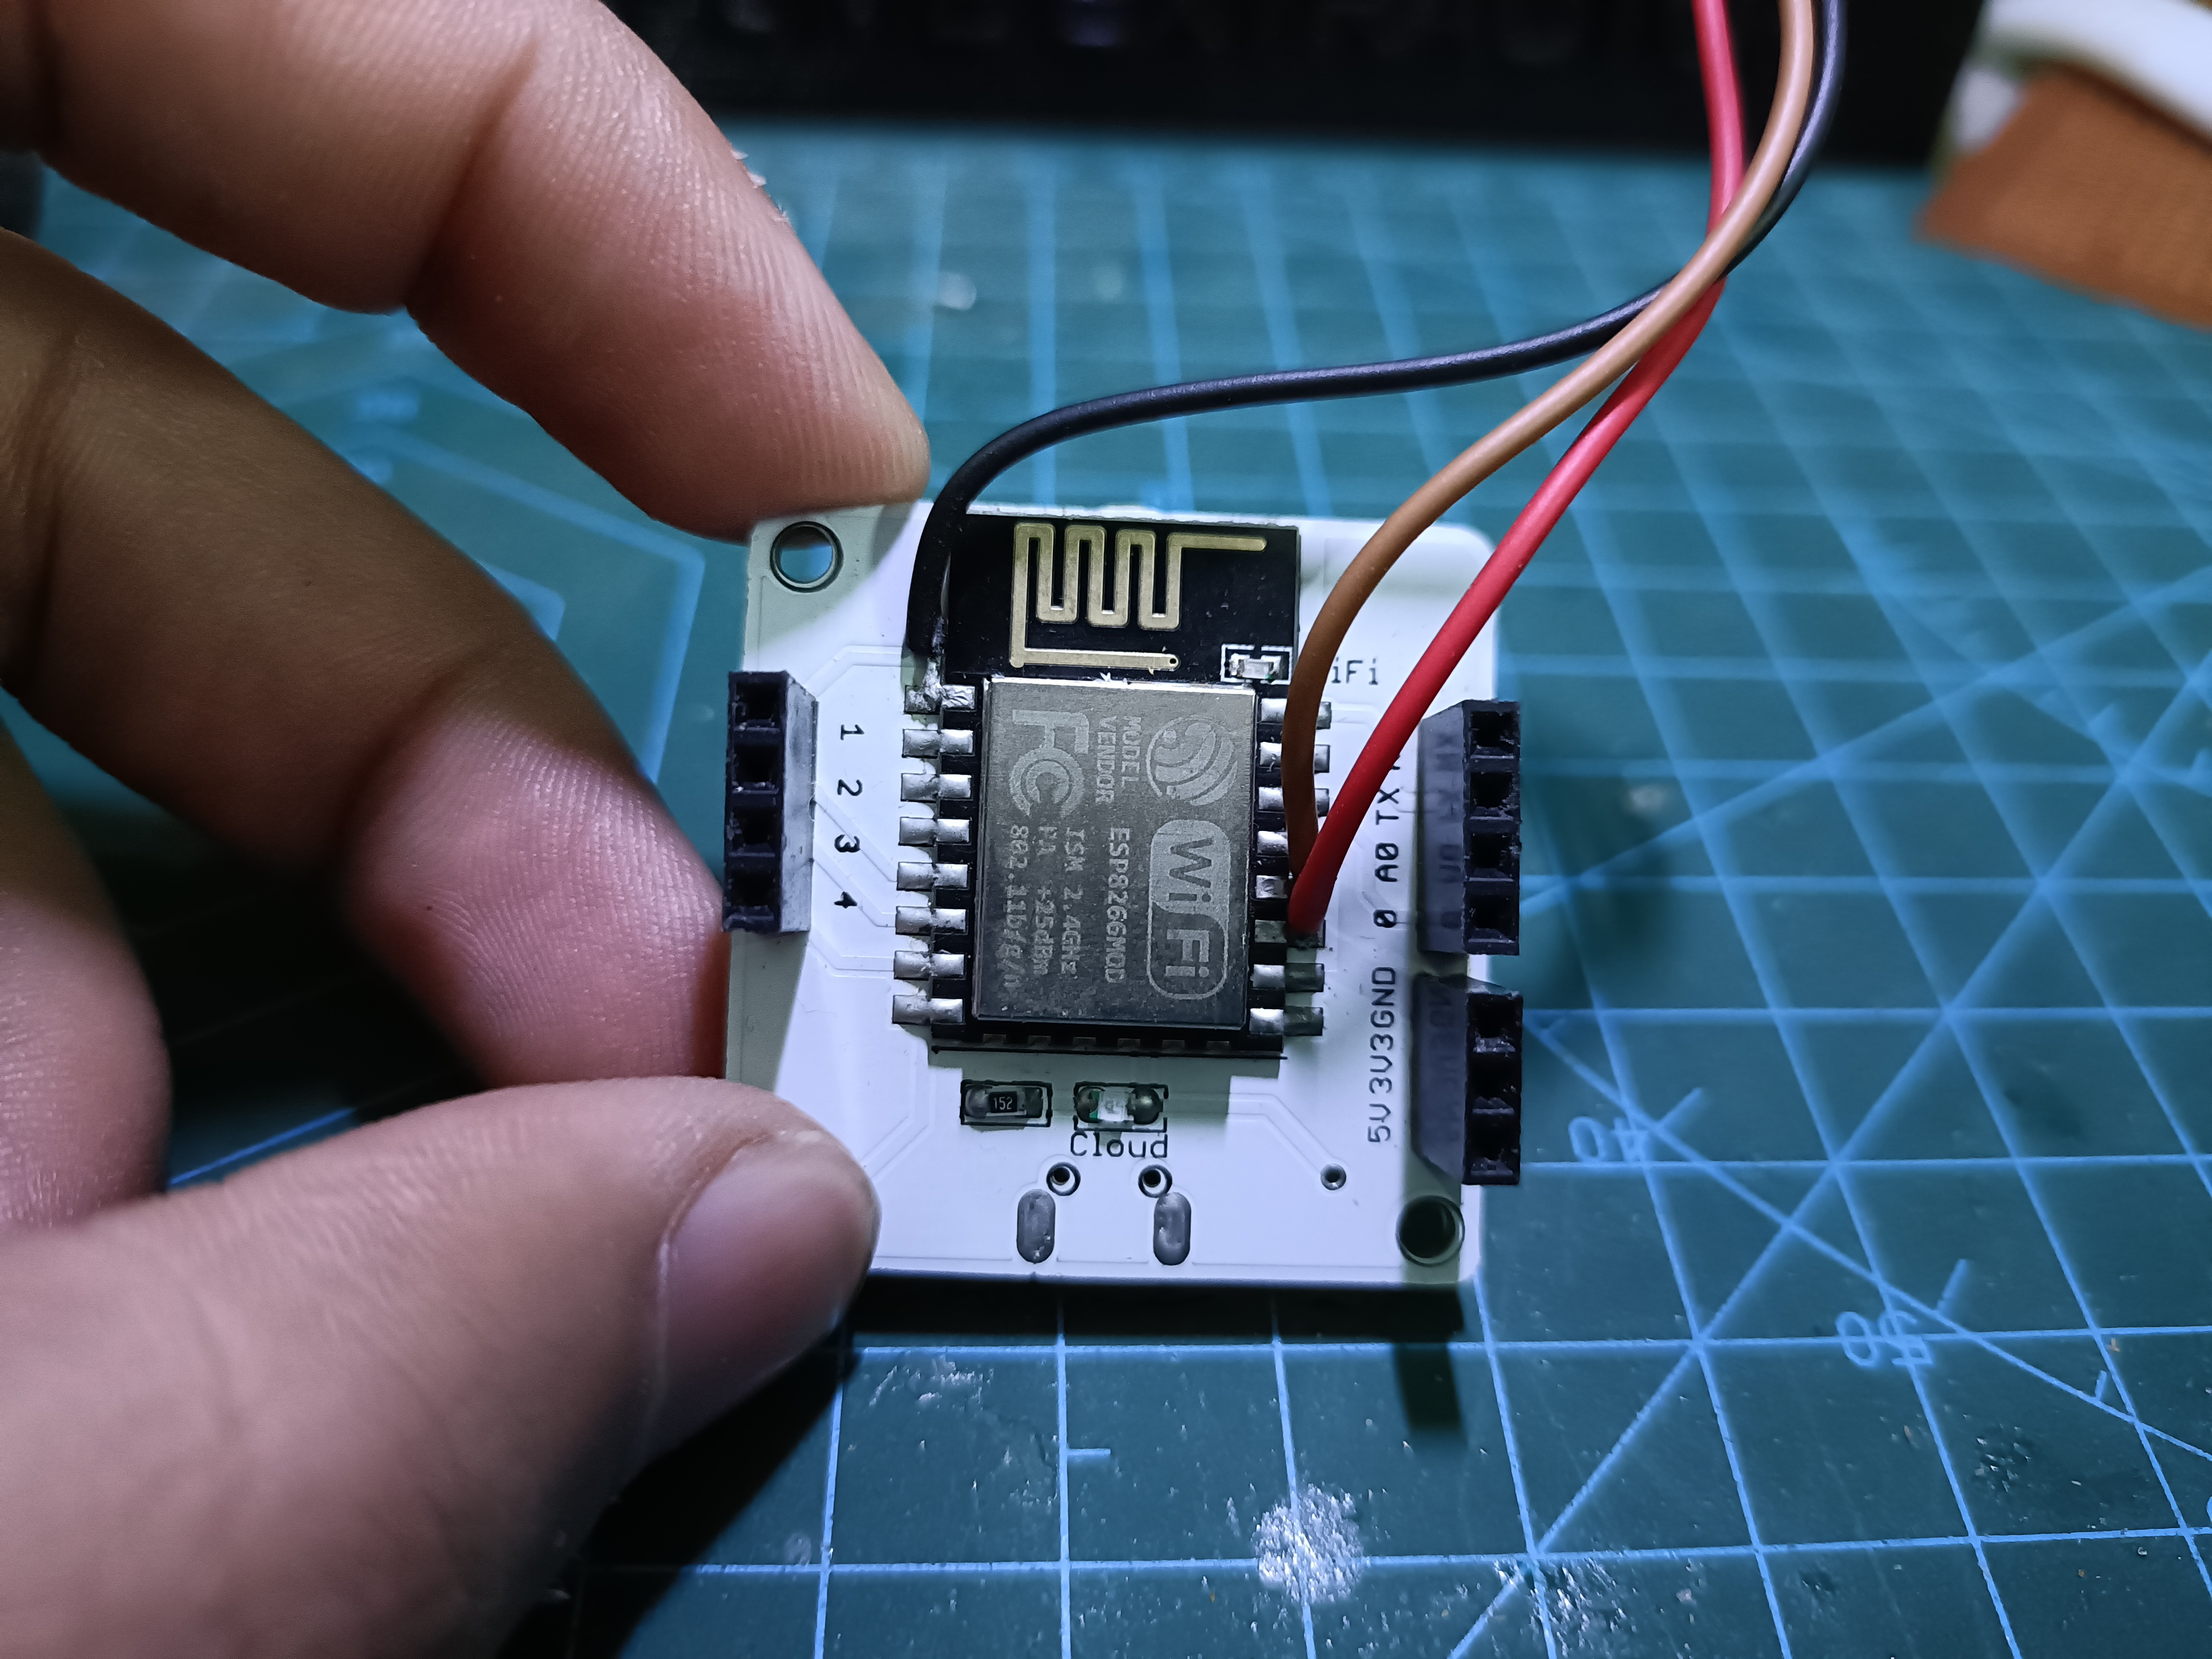 The Bolt IOT wifi module with the wires soldered on required GPIOs